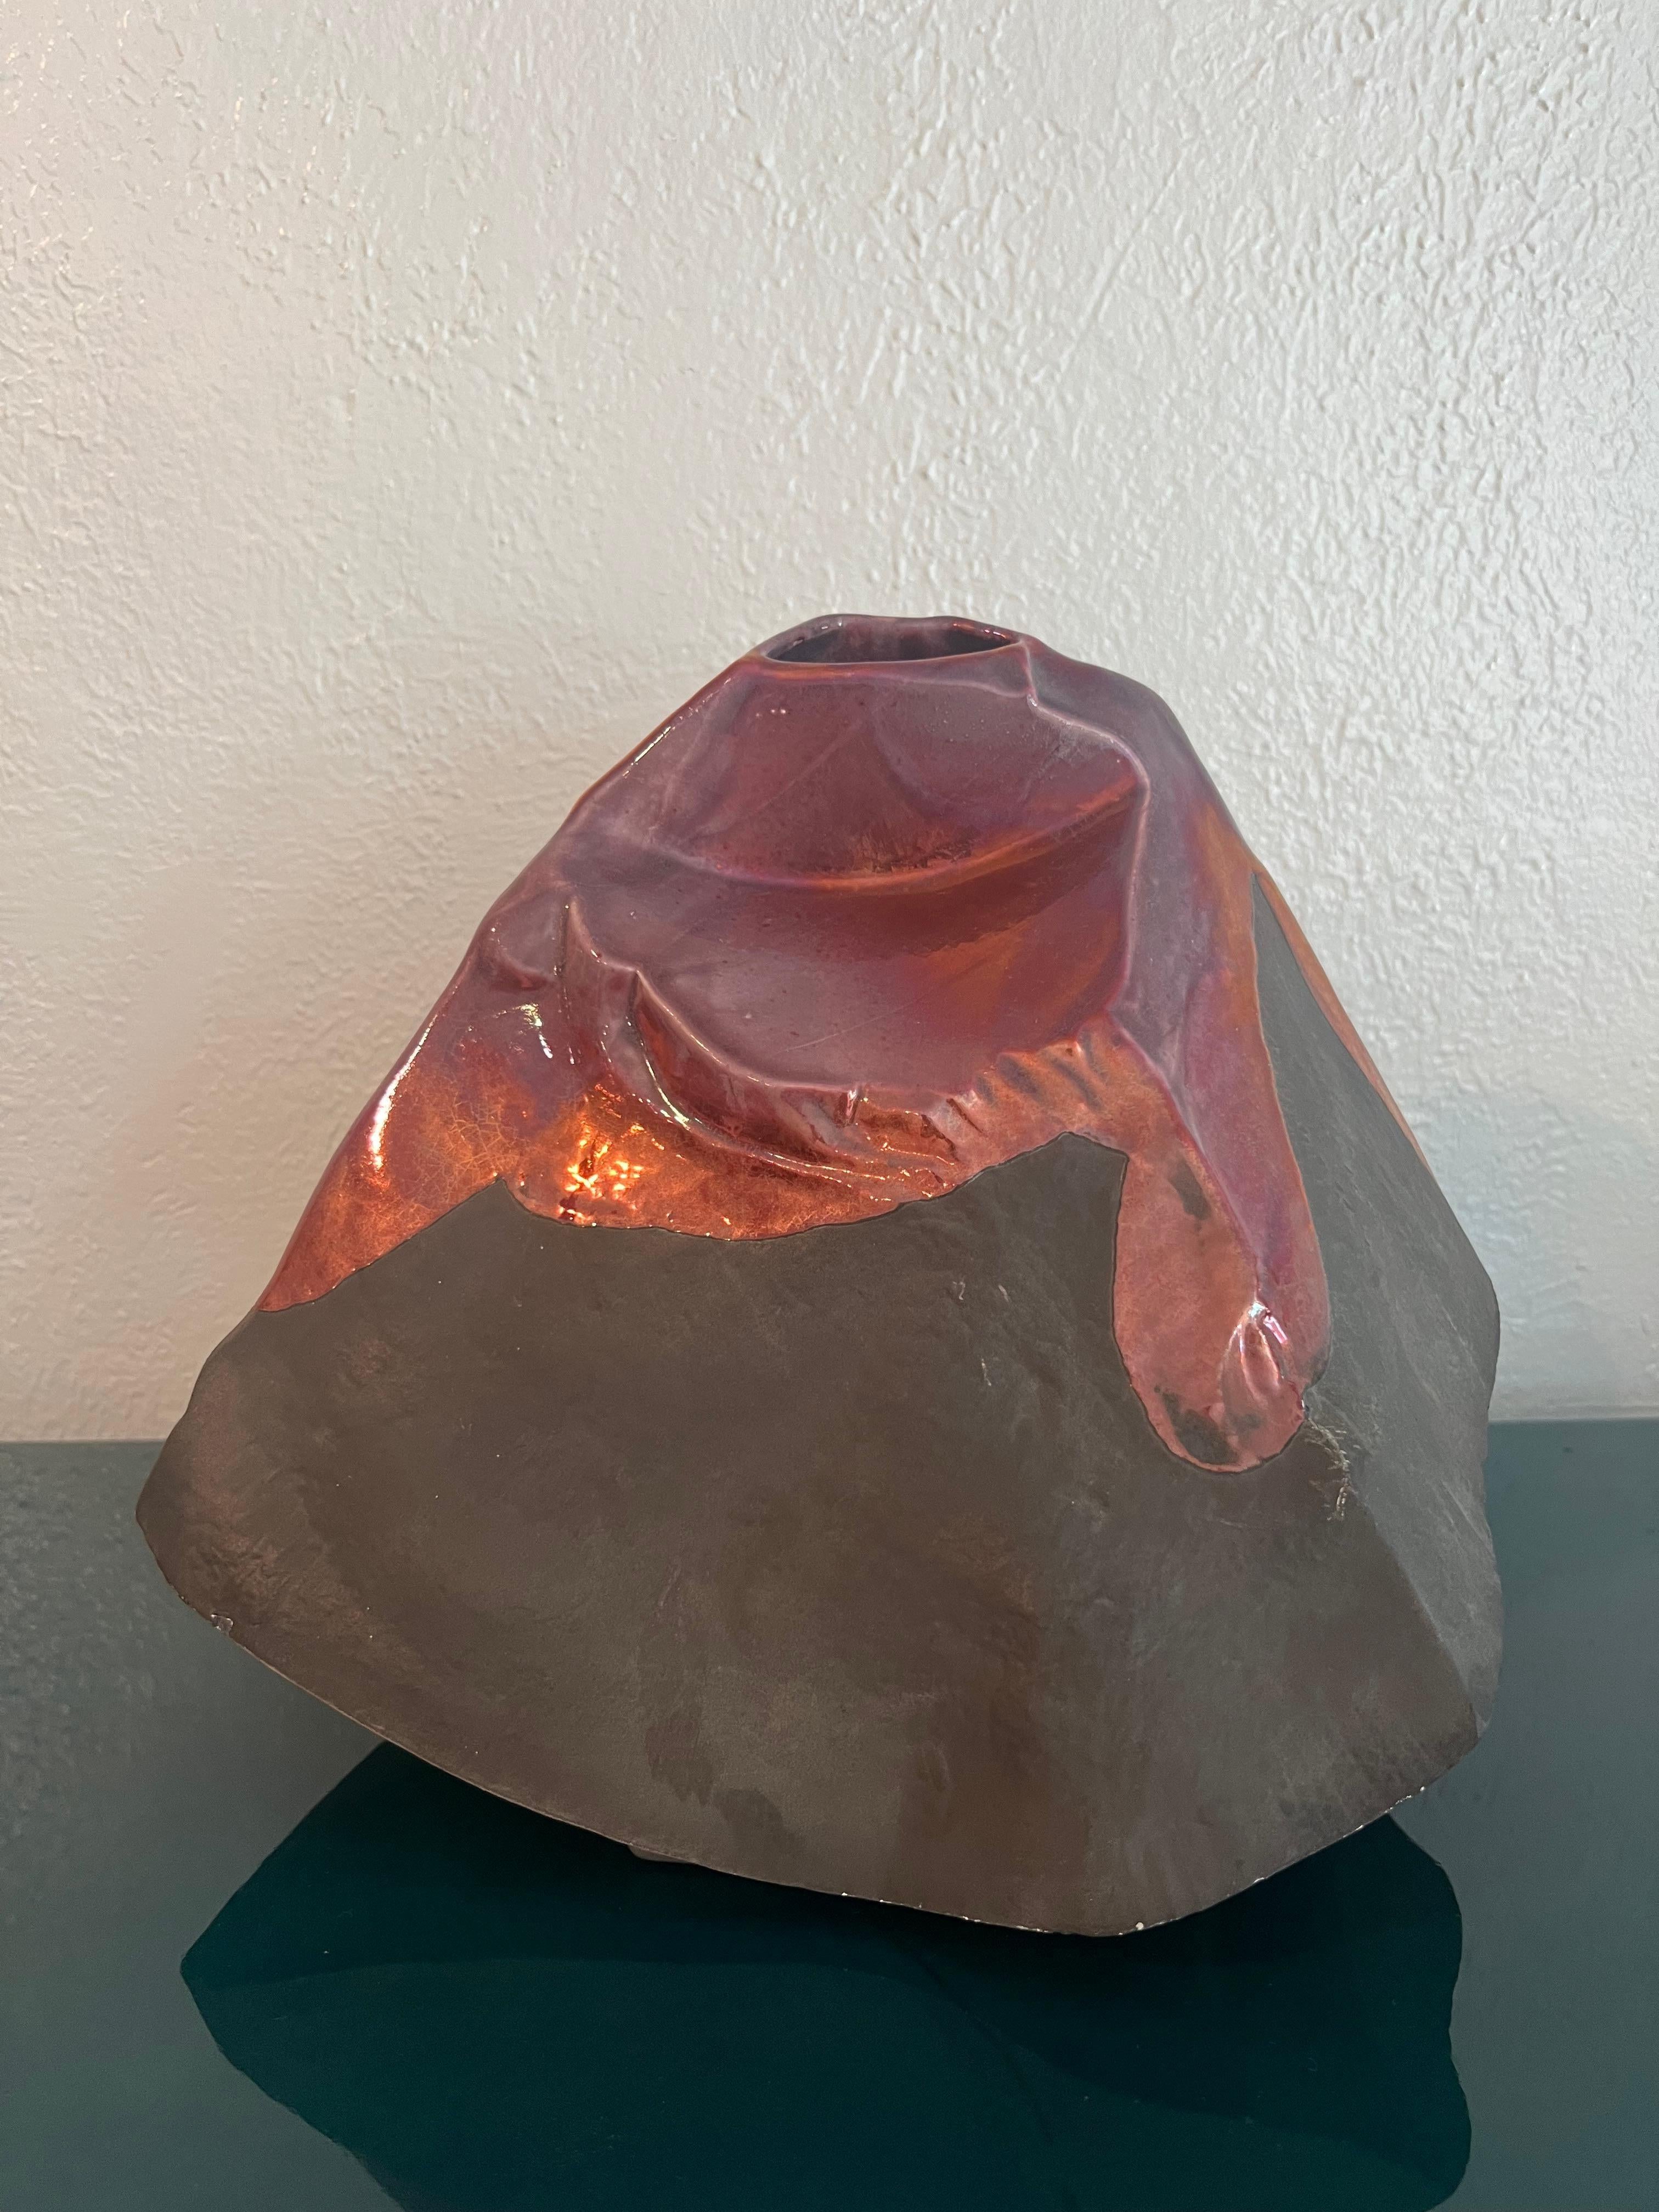 Tony Evans glazed raku vase. Rare form, possibly made to resemble a volcano. Minor areas of wear to finish (please refer to photos). Additional photos available upon request. 

Would work well in a variety of interiors such as modern, mid century